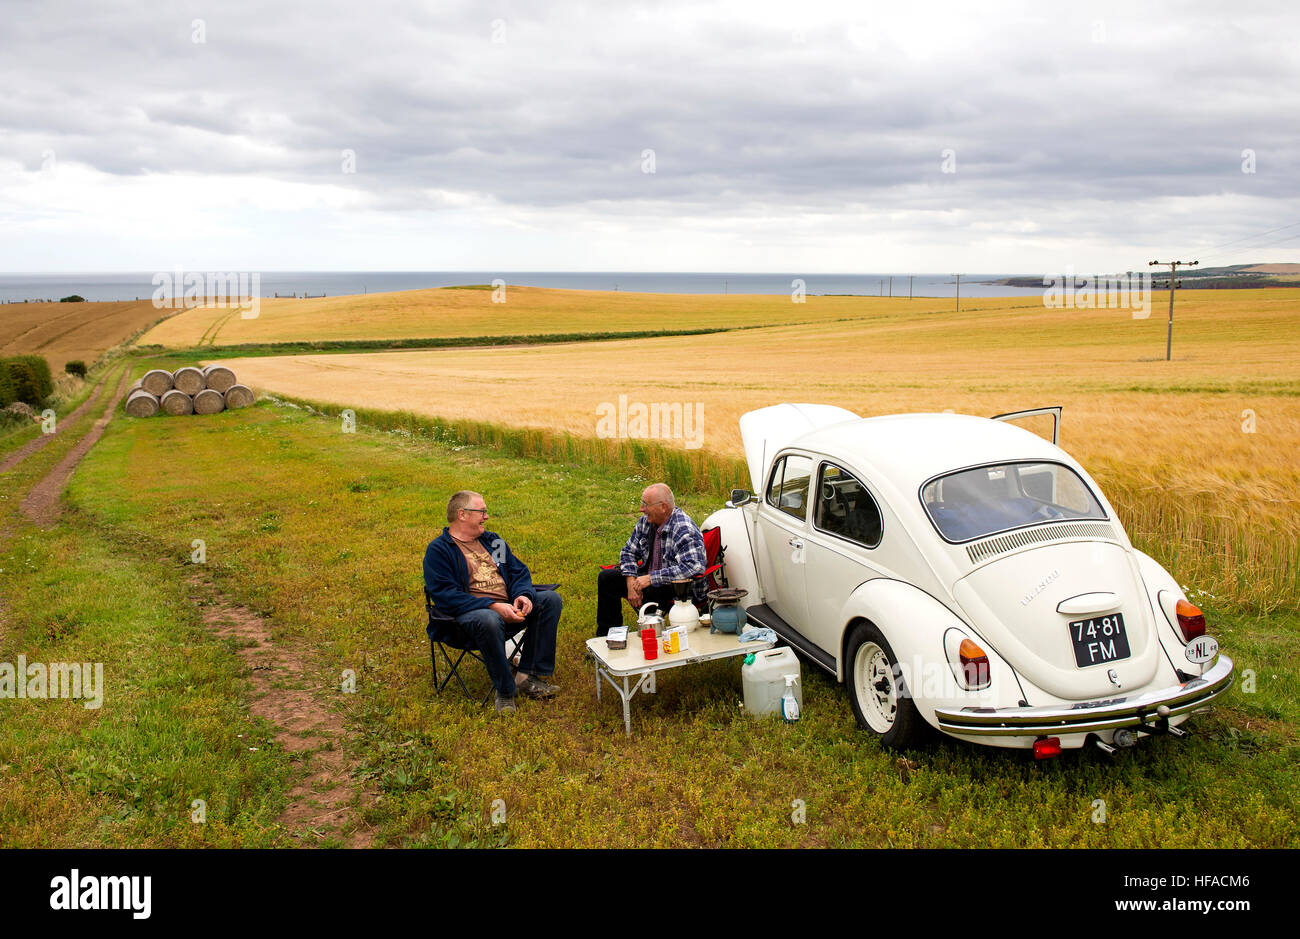 Two Dutch tourists have a picnic beside their VW beetle in a field near St Abbs, Berwickshire, Scottish Borders, Scotland, UK Stock Photo